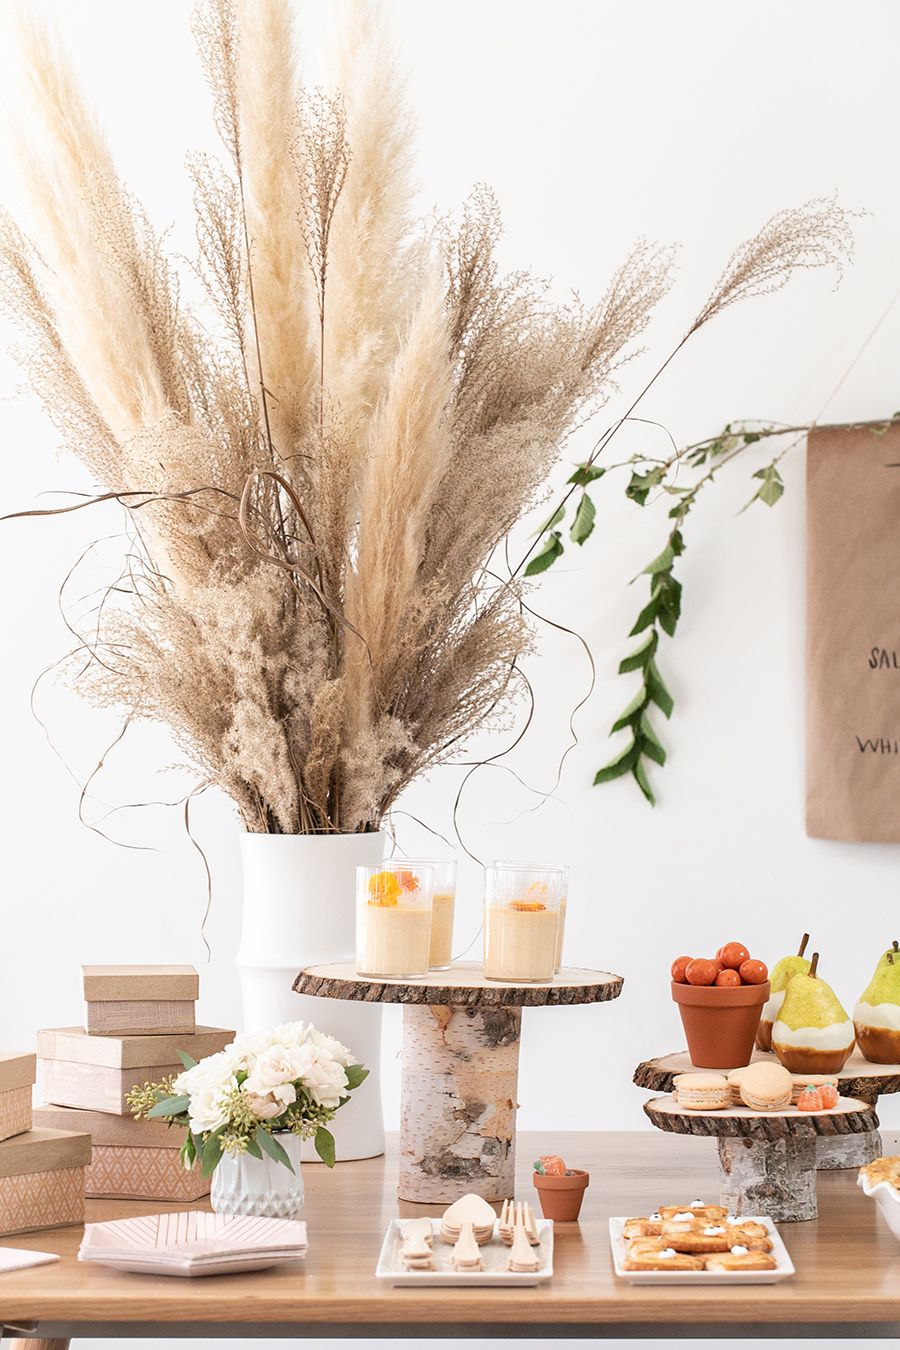 Reeds make for beautiful Thanksgiving centerpieces. Source: Country Living